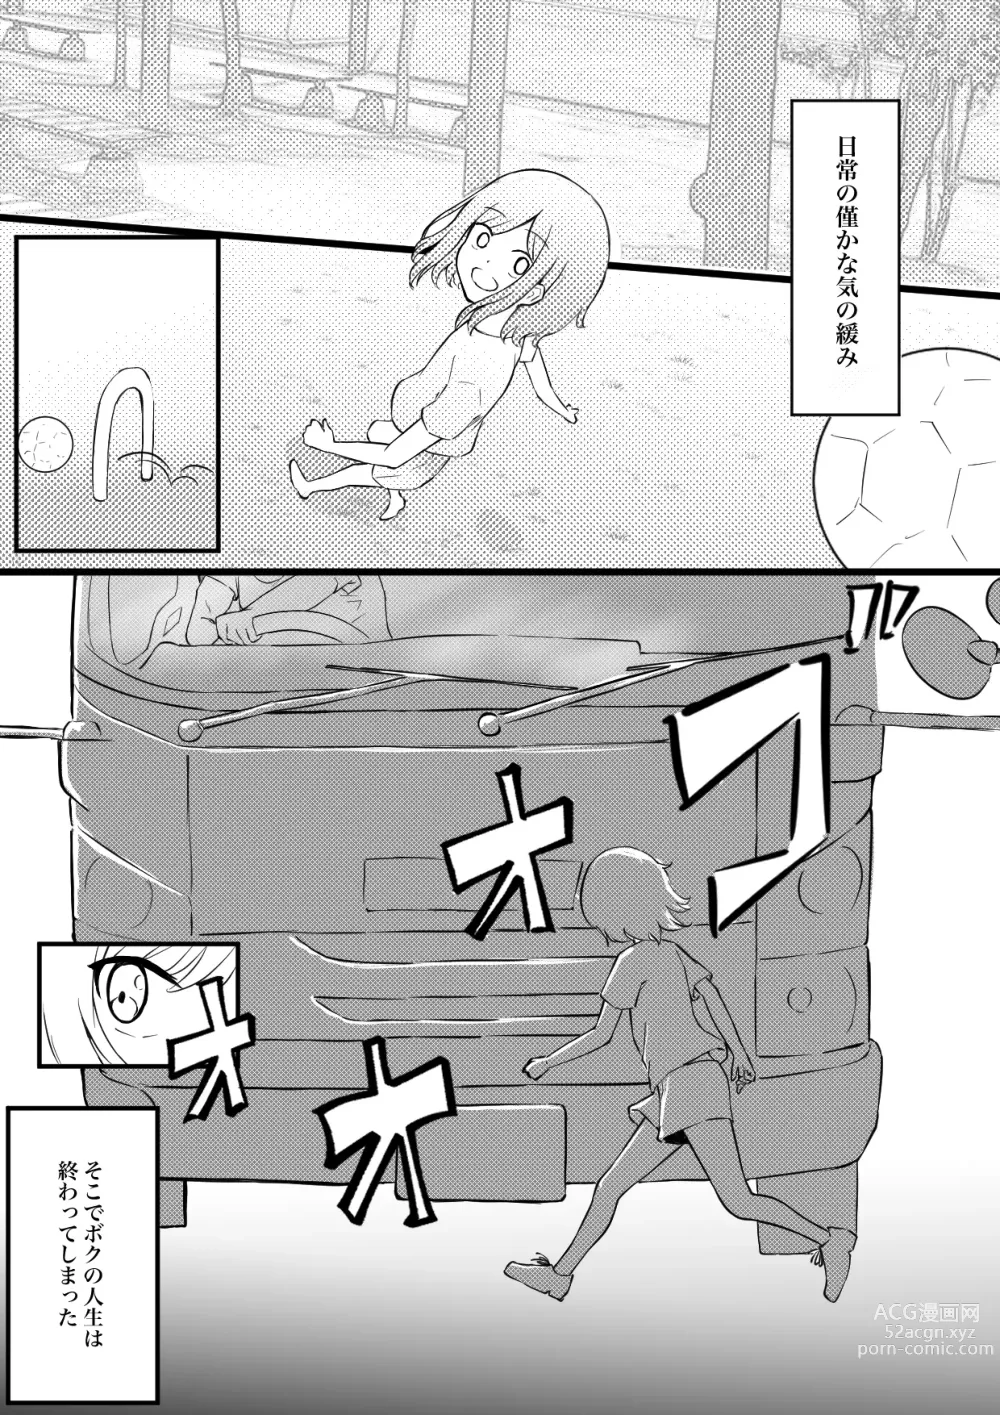 Page 2 of doujinshi permission